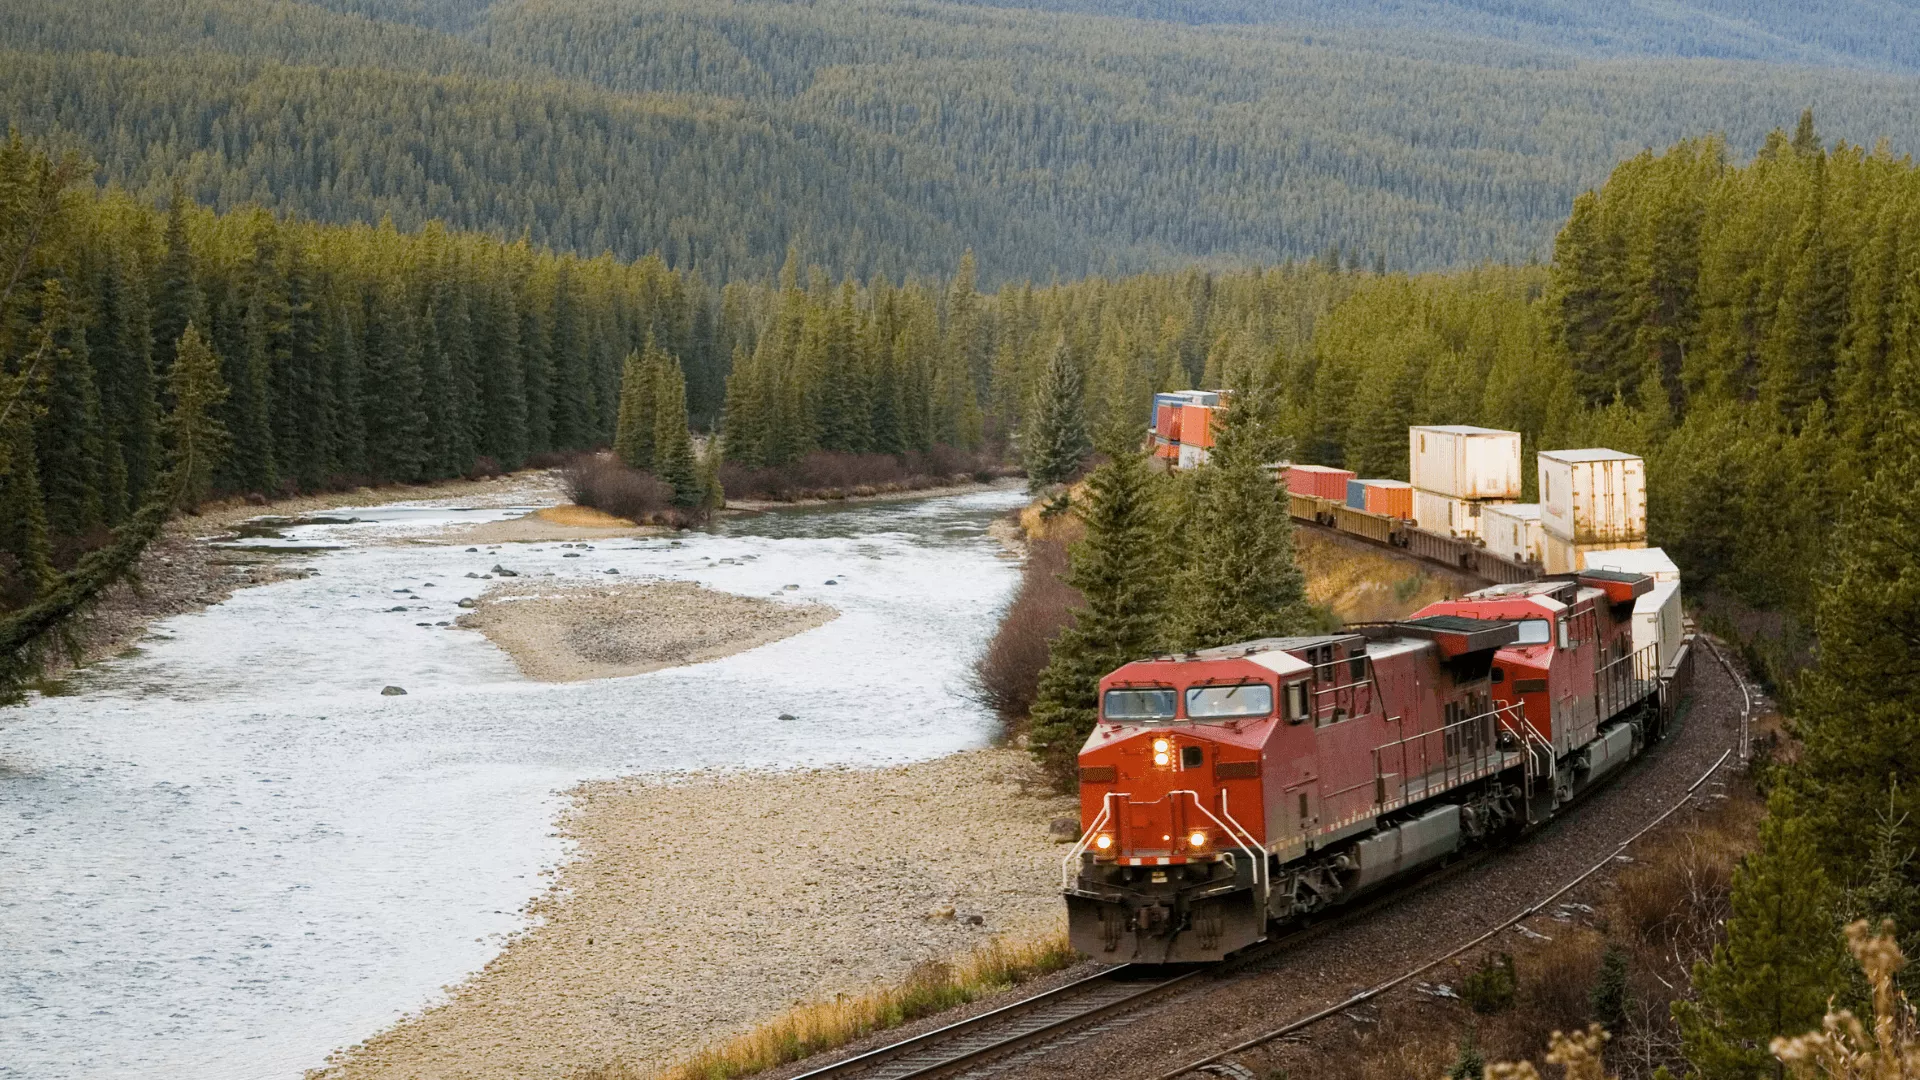 Train going through the Canadian landscape